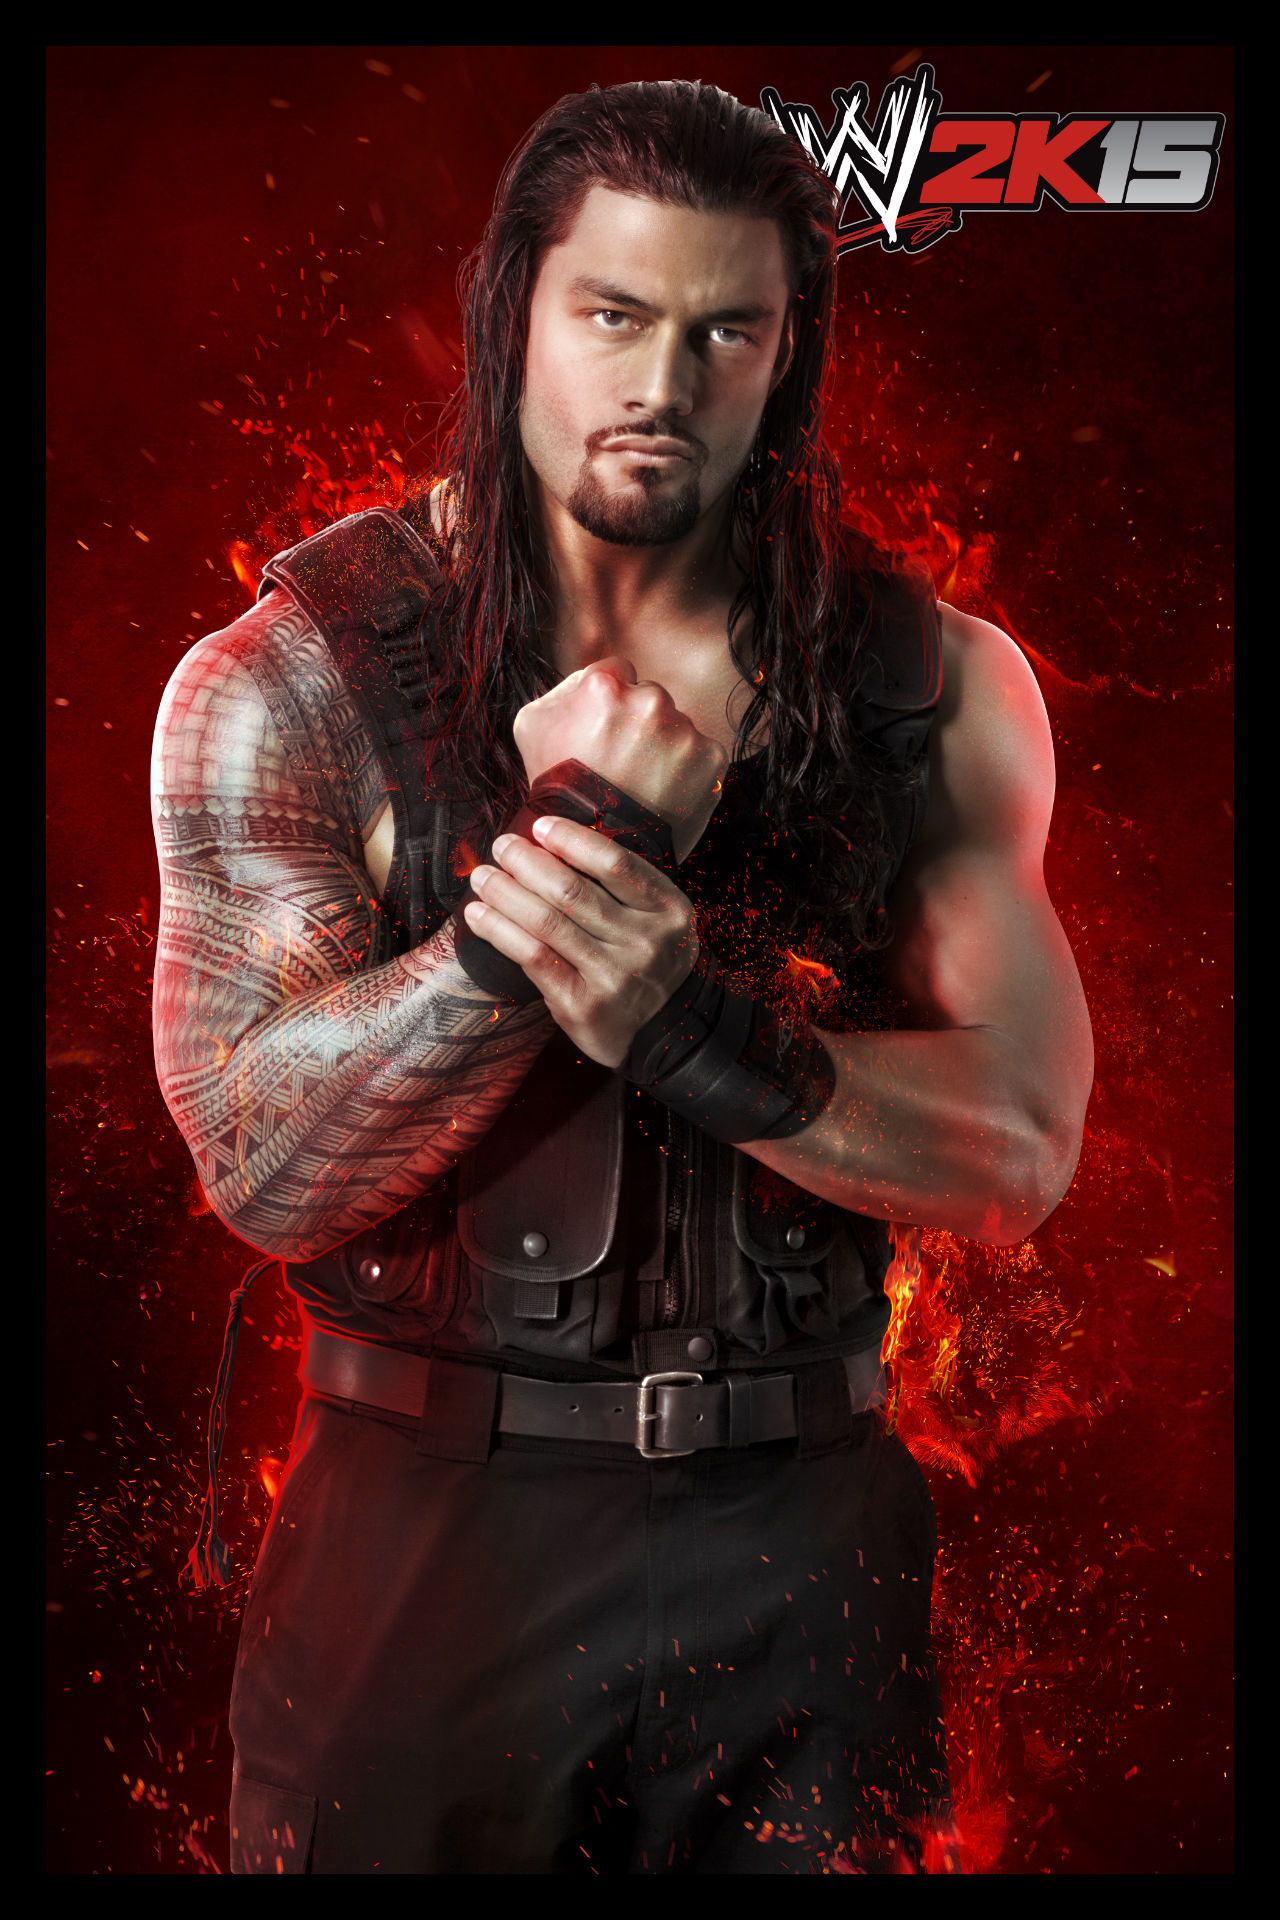 Roman Reigns Images Wwe 2k15 Hd Wallpaper And Background - Roman Reigns - HD Wallpaper 